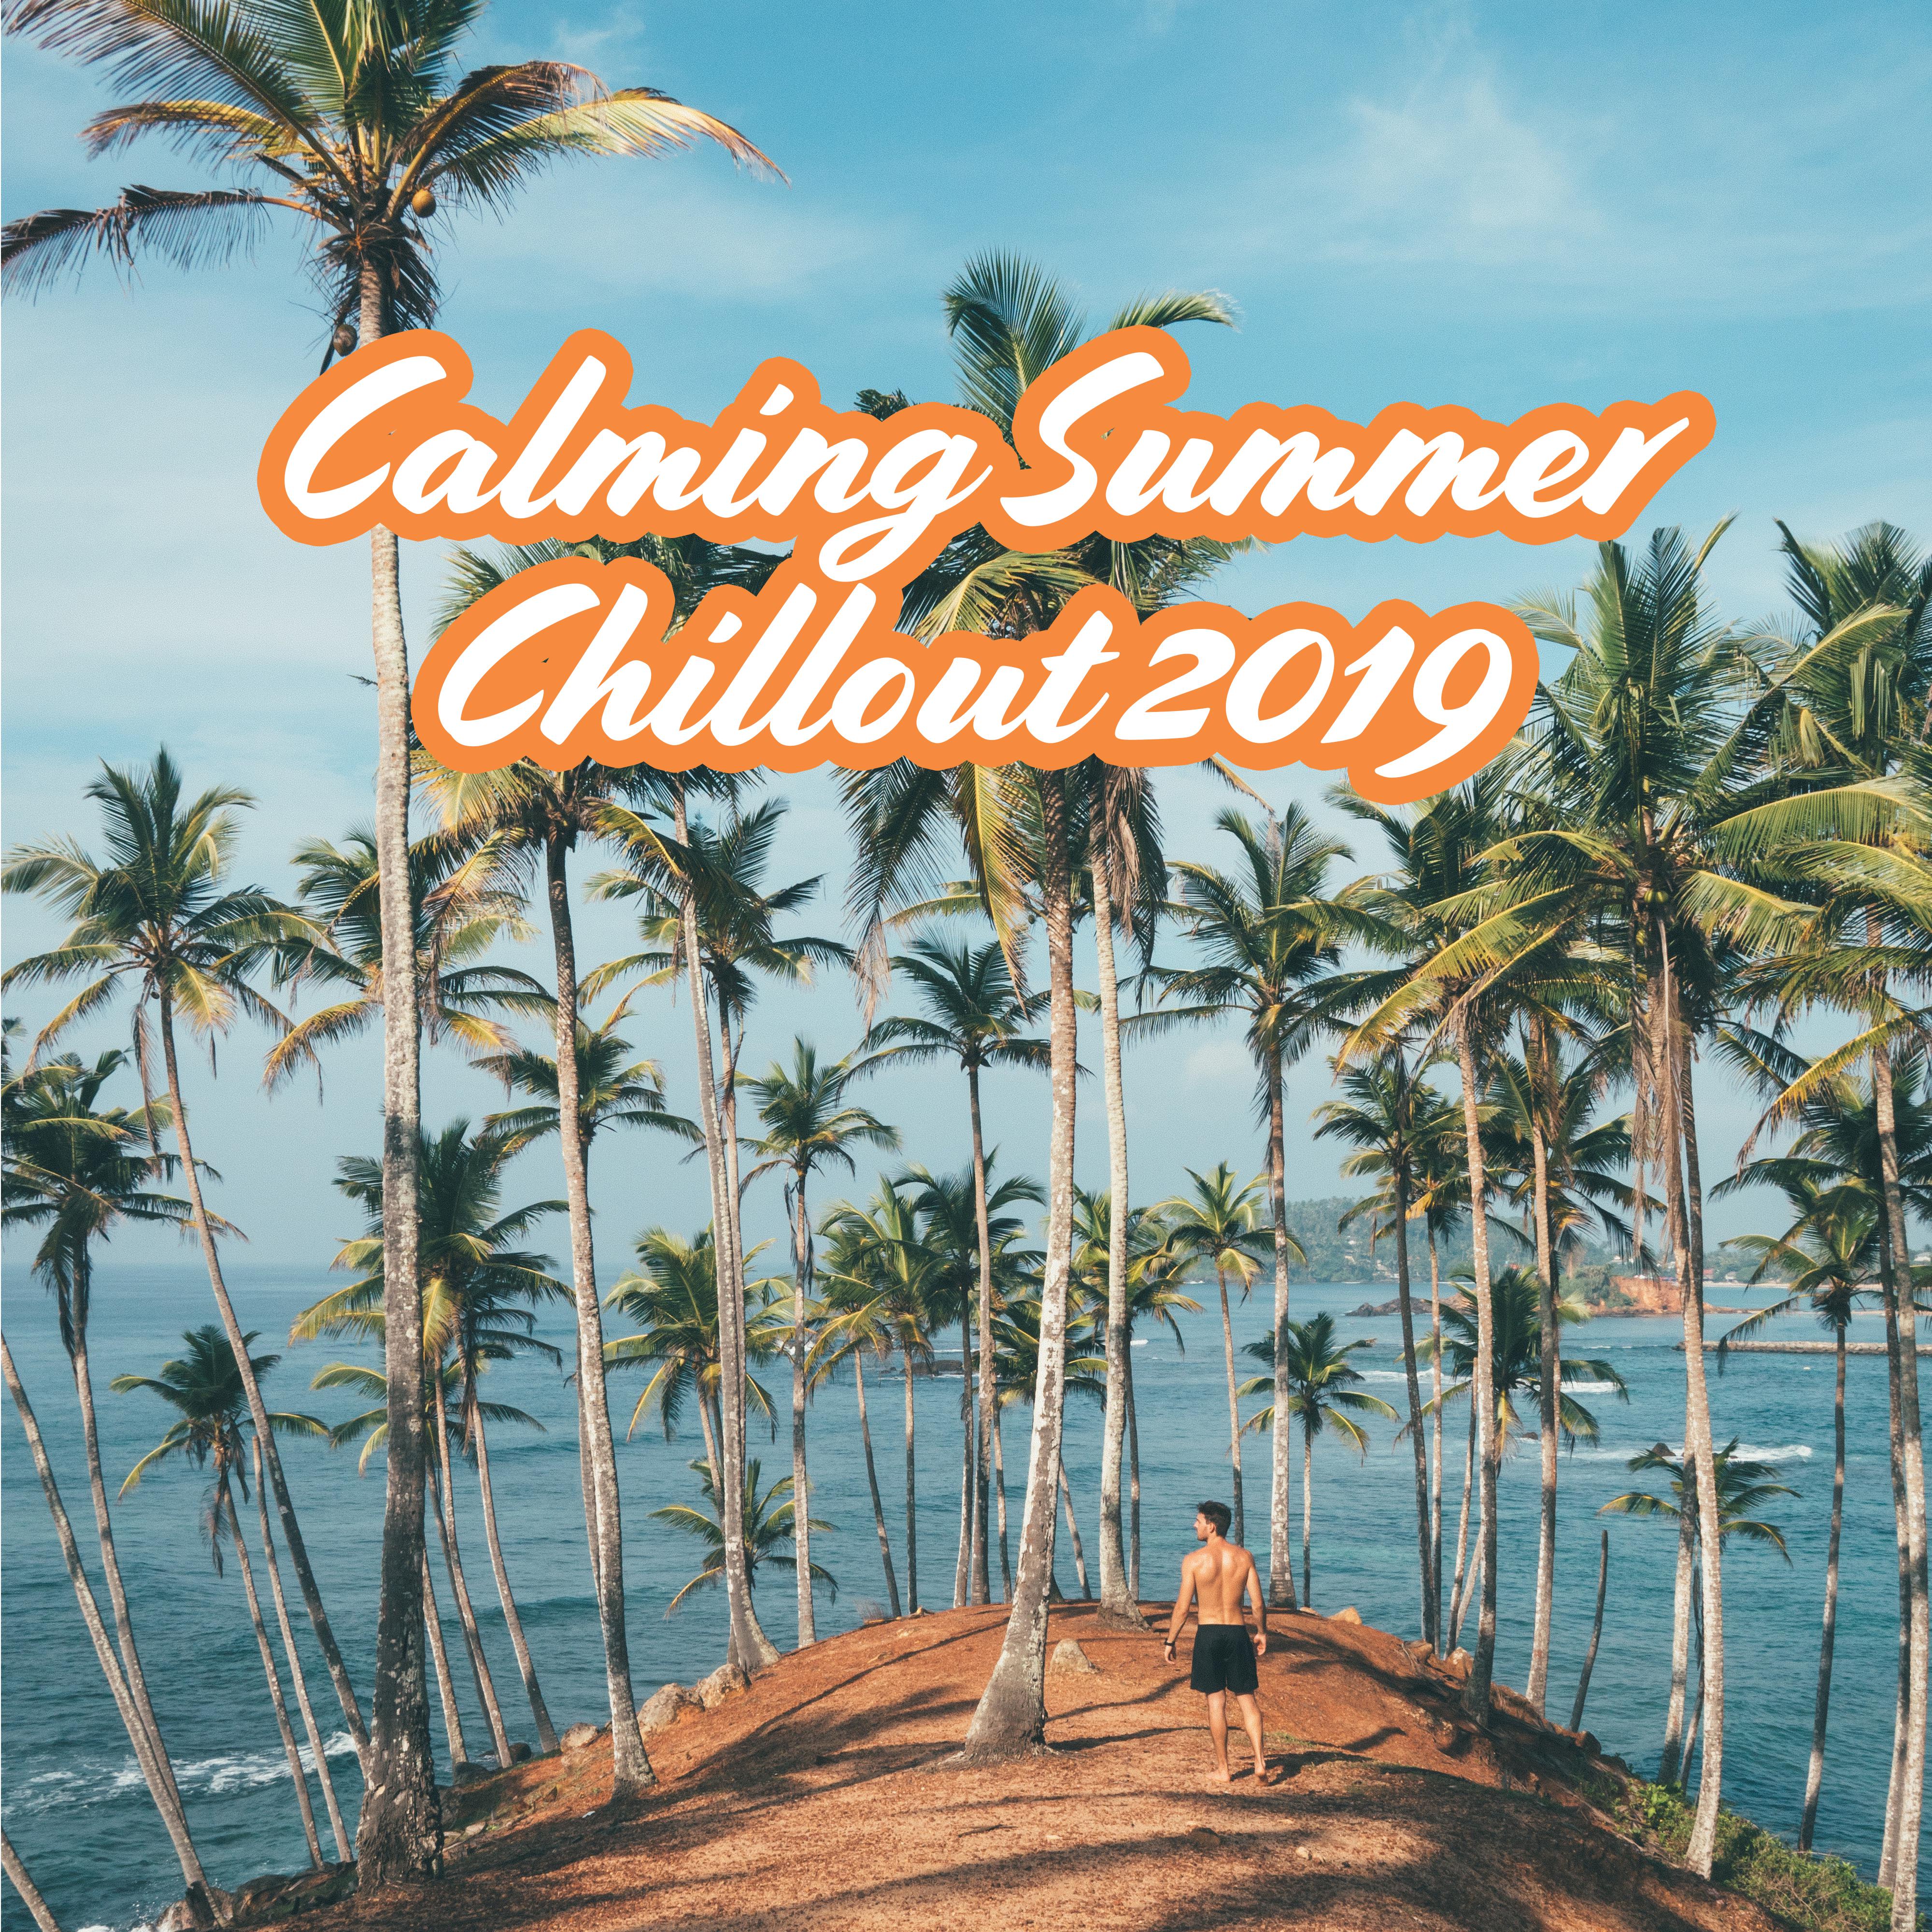 Calming Summer Chillout 2019 – Ibiza Chill Out, Perfect Relax Zone, Beach Music, Zen Serenity, Sexy Vibes, Pure Mind